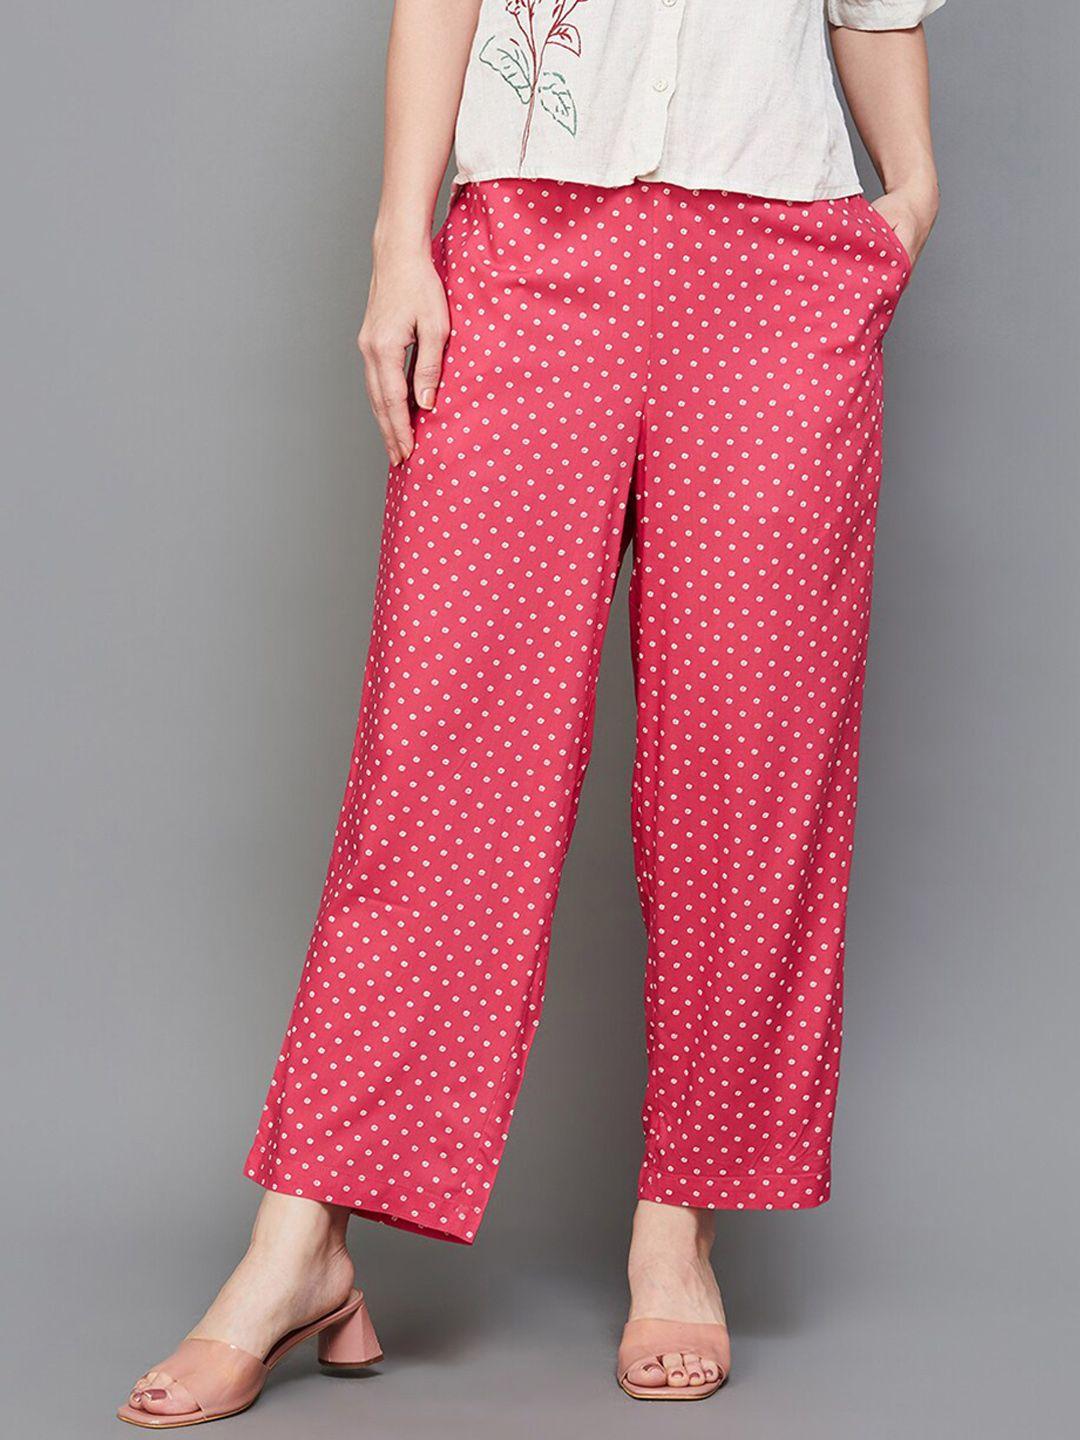 melange by lifestyle women polka dot printed mid-rise trousers